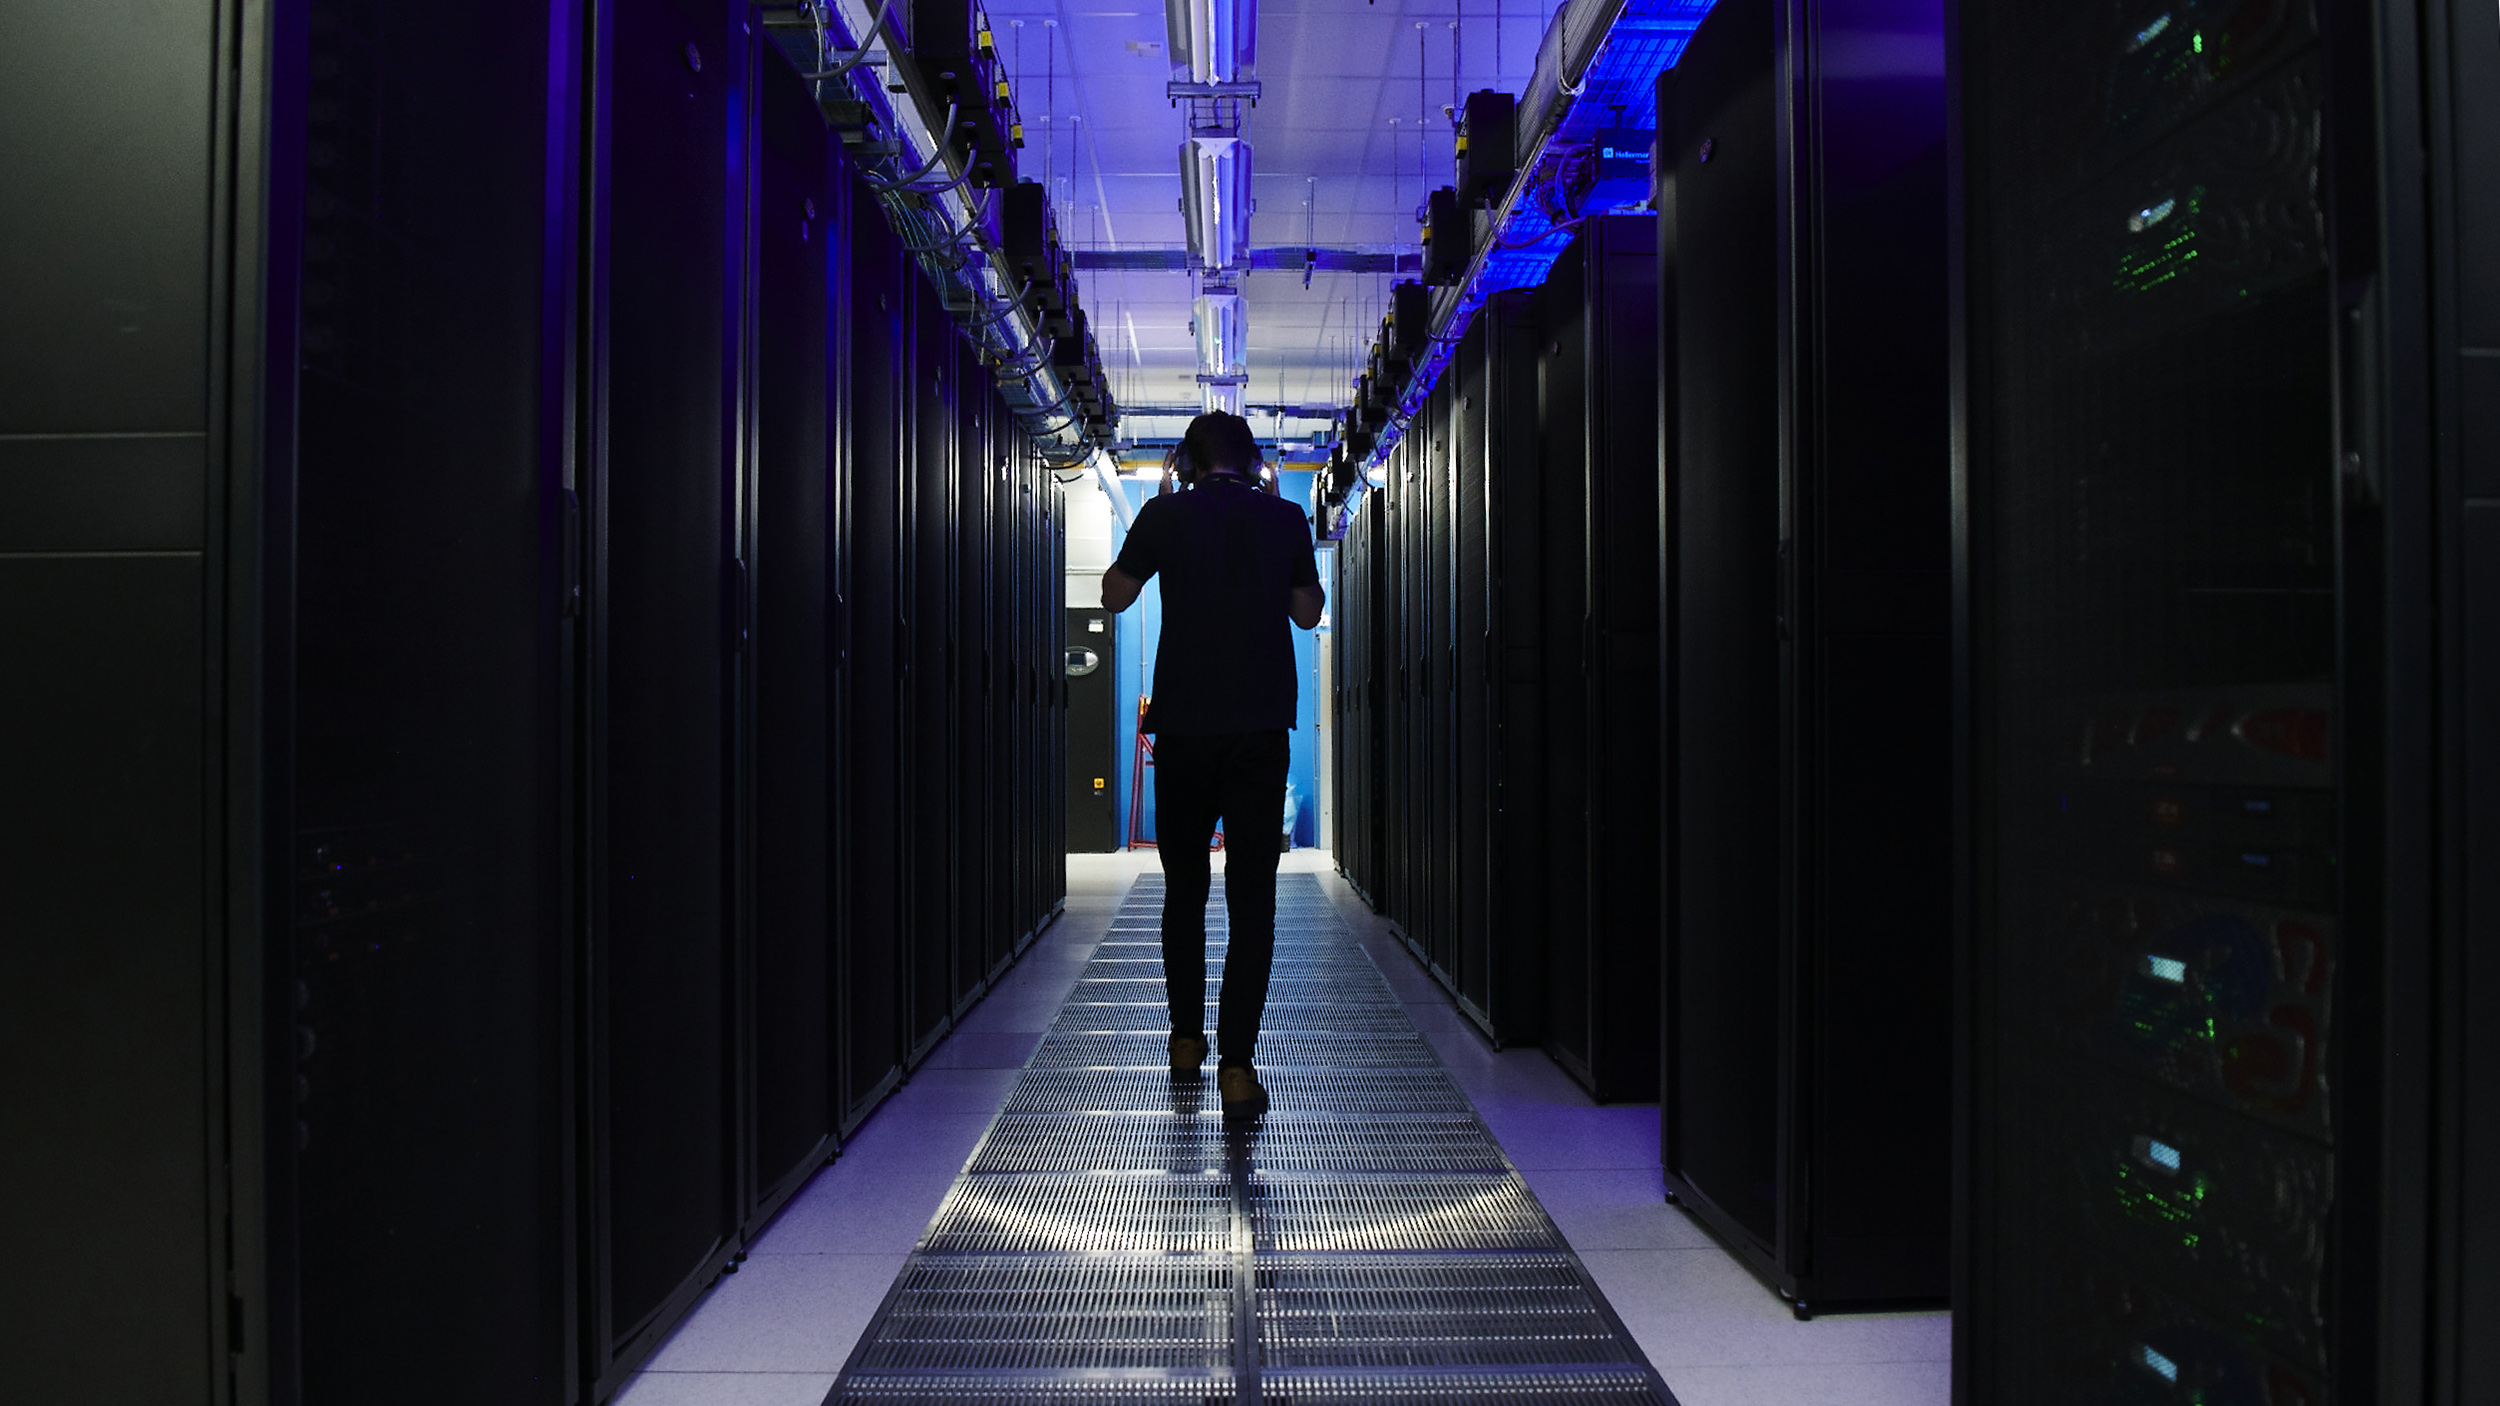 A man walks in a room full of data servers.